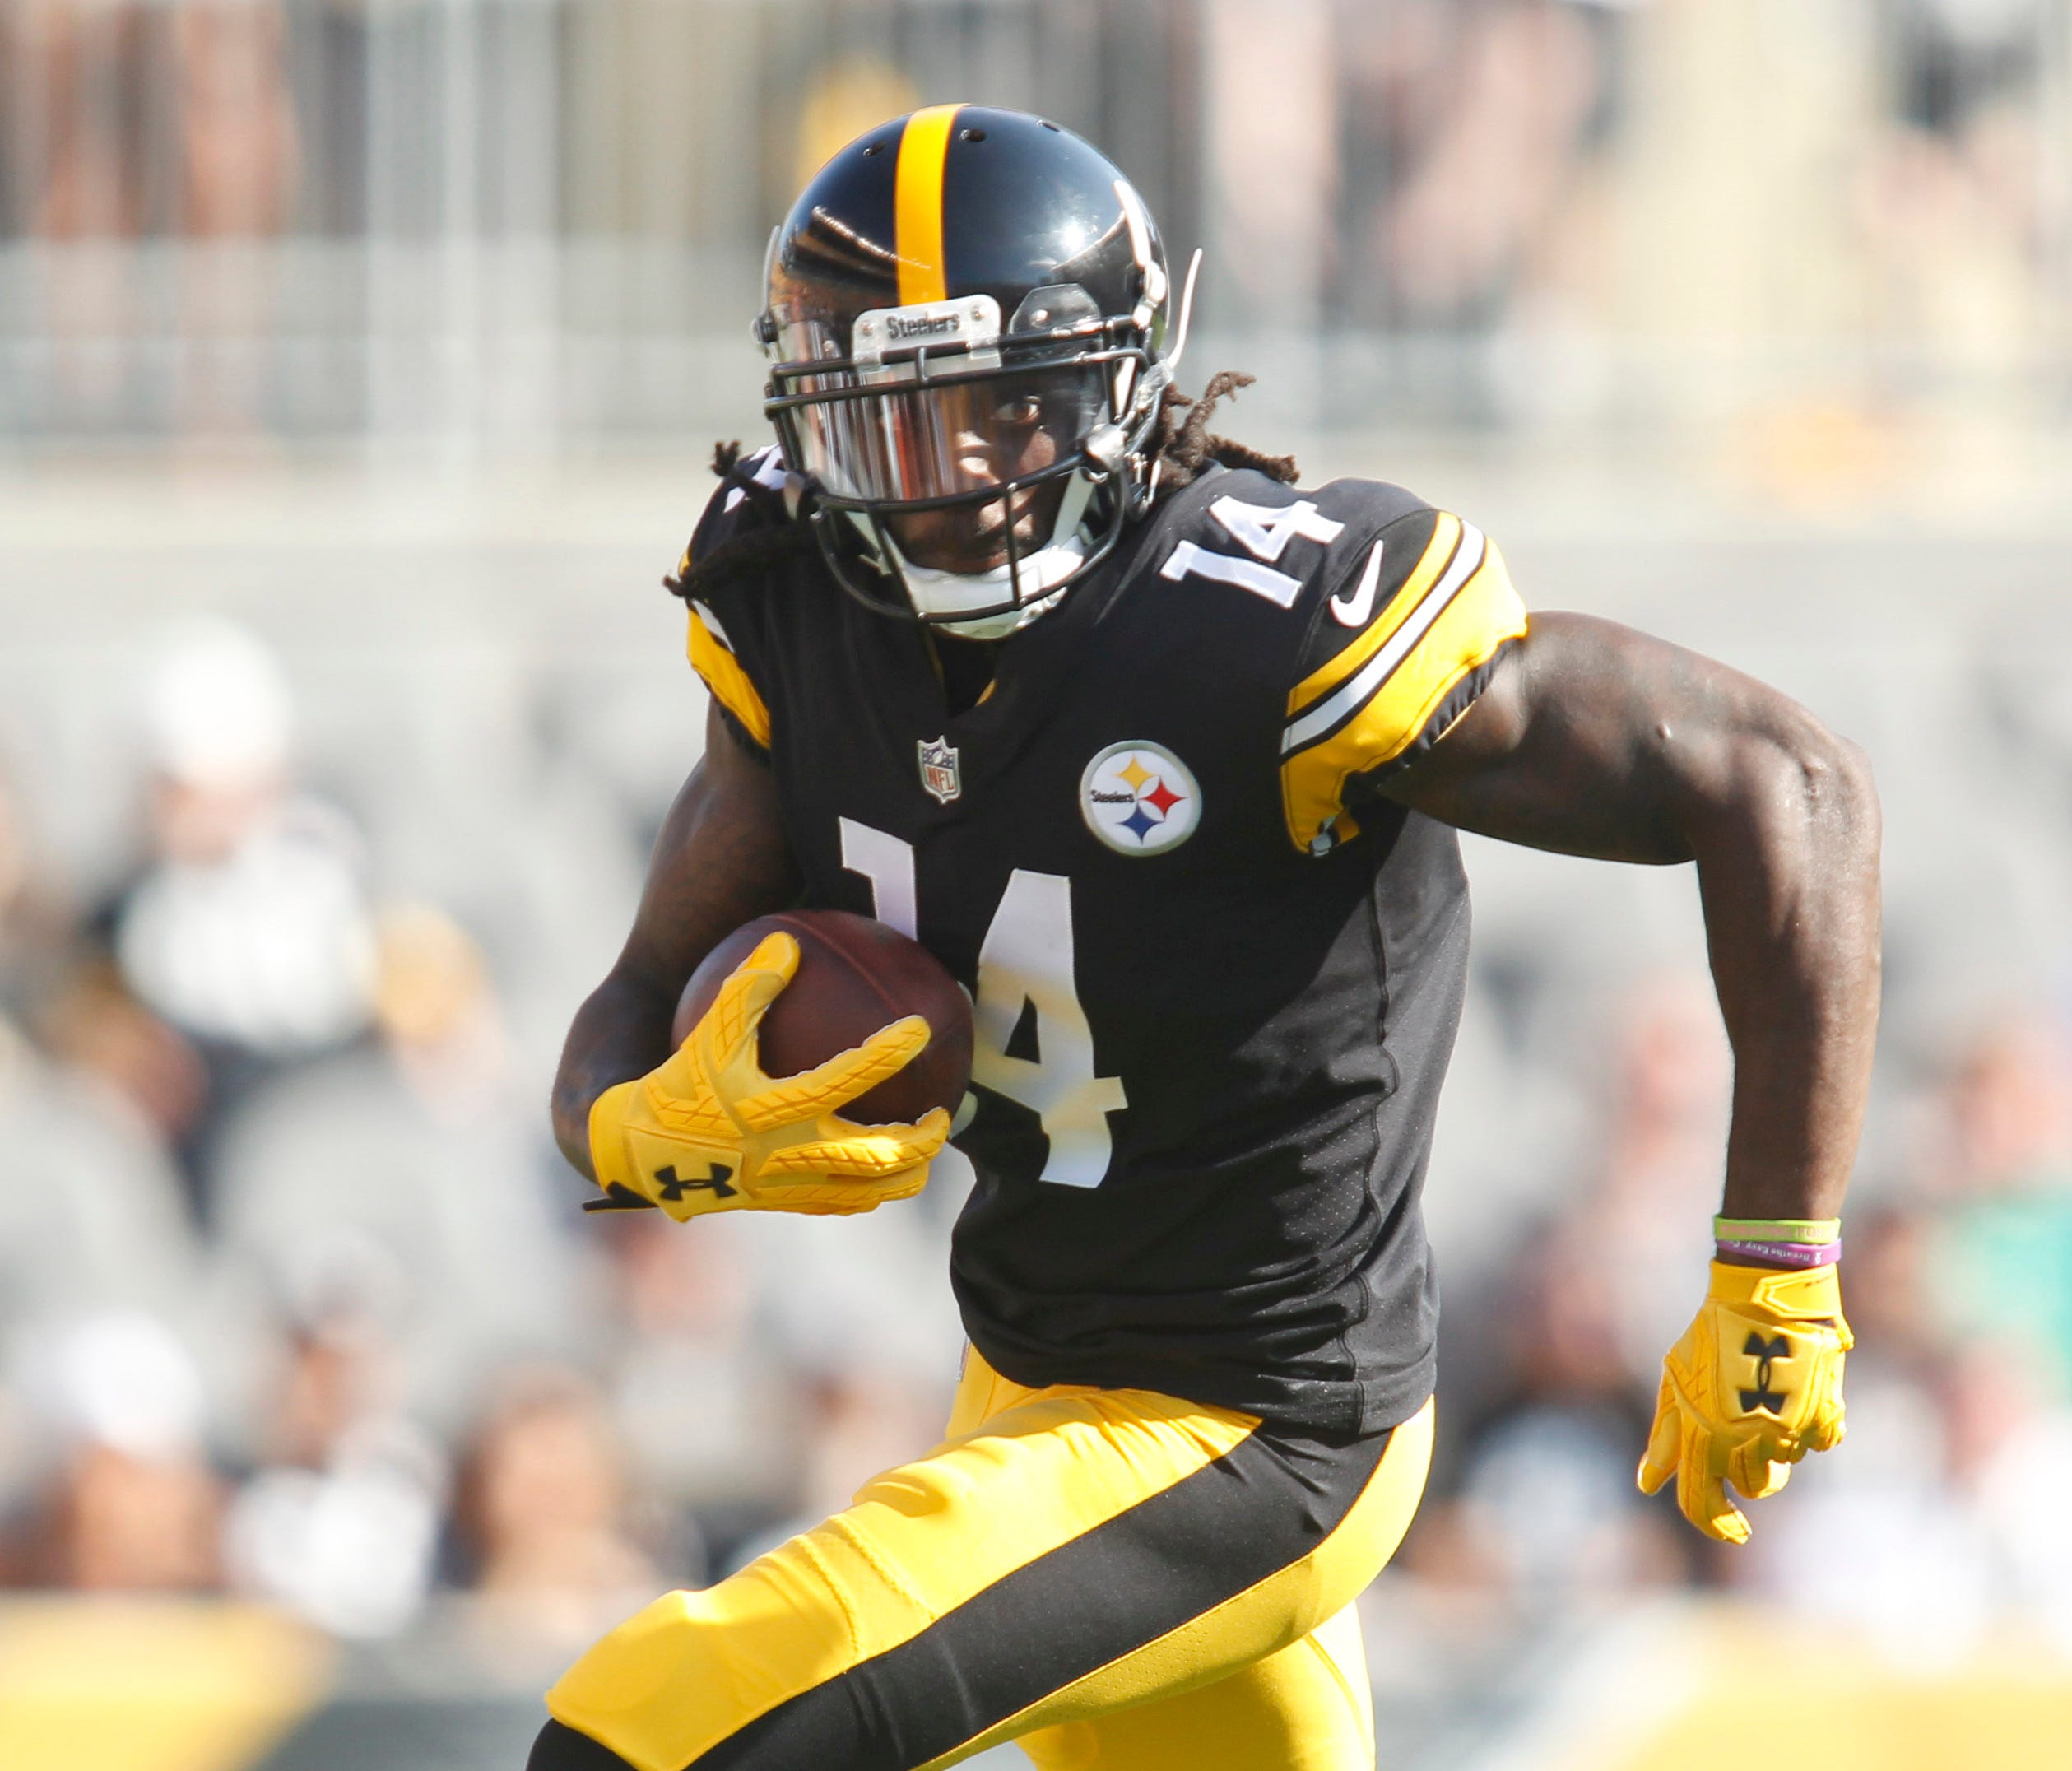 Pittsburgh Steelers wide receiver Sammie Coates (14) runs after a catch against the Atlanta Falcons during the second quarter at Heinz Field.